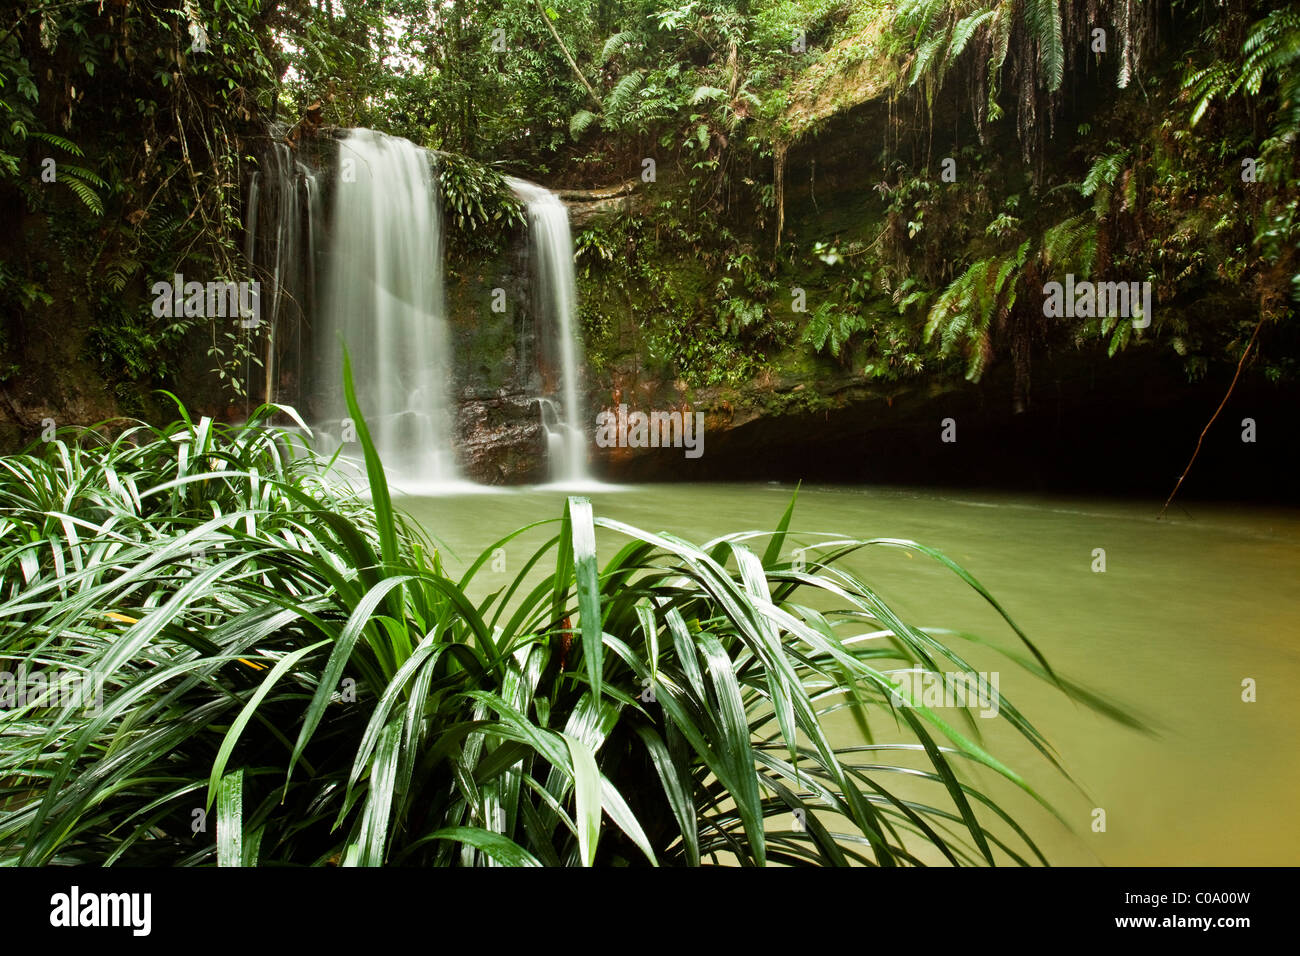 A waterfall located in a tropical jungle on the island of Borneo Stock Photo